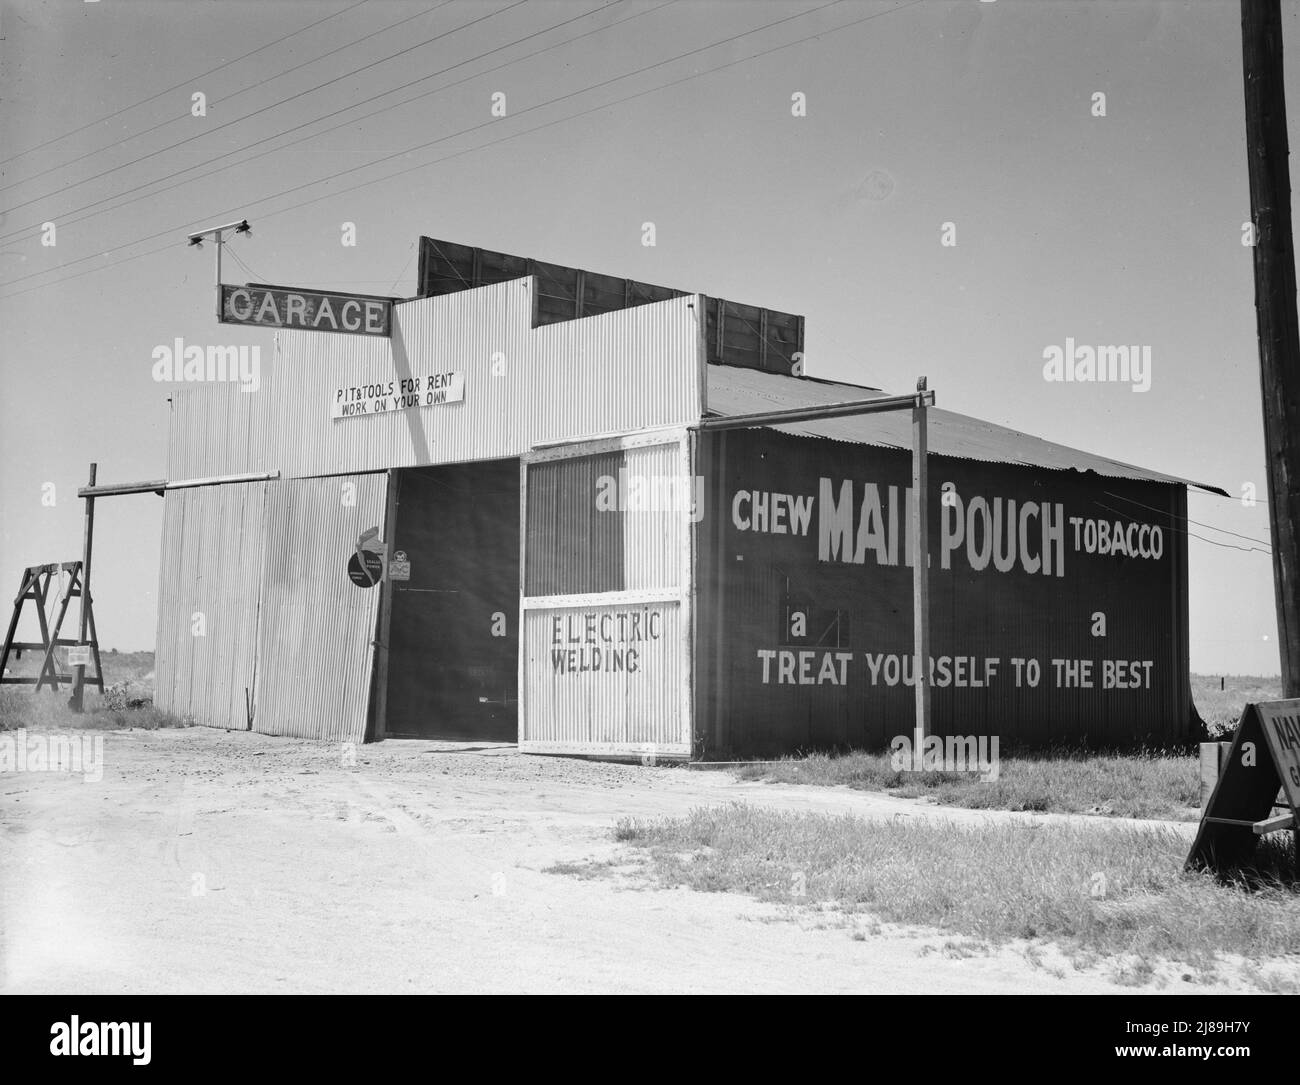 U.S. 99. Fresno County, California. &quot;Pit and tools for rent--work on your own.&quot; California. ['Garage; Electric Welding; Chew Mail Pouch Tobacco - Treat Yourself to the Best']. Stock Photo